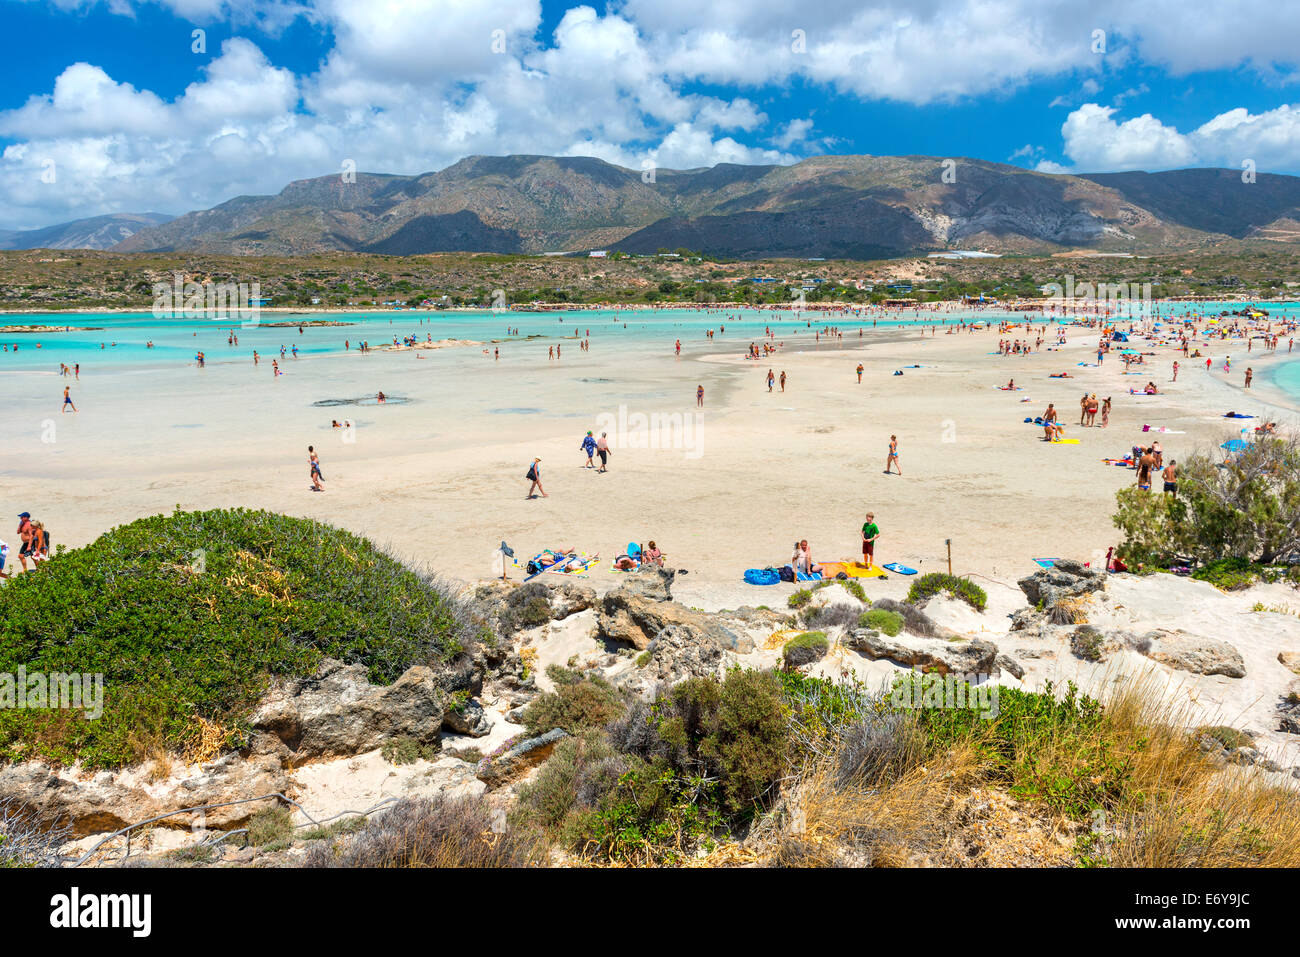 ELAFONISSI, CRETE, GREECE - July 24, 2014: Tourists At The Famous Pink Sand Beach Of Elafonissi ( Elafonisi ) In Crete, Greece Stock Photo